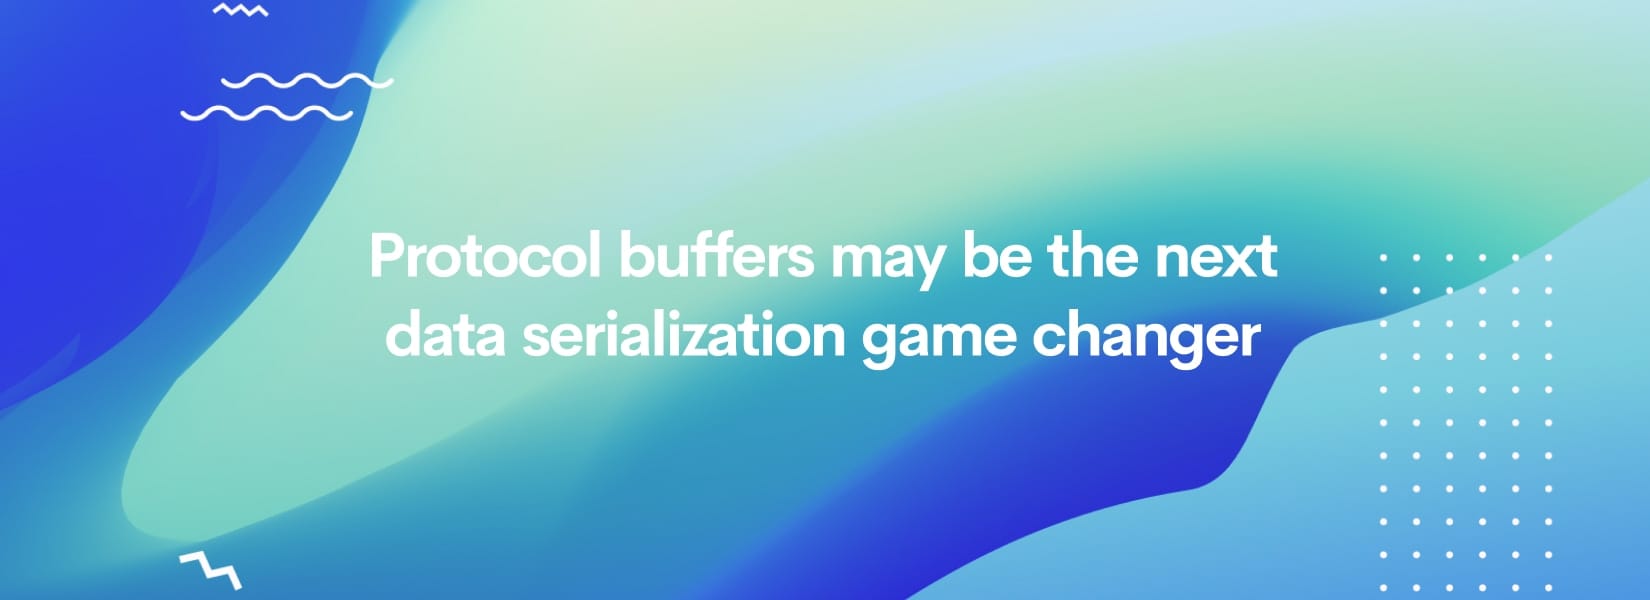 Protocol buffers may be the next data serialization game changer